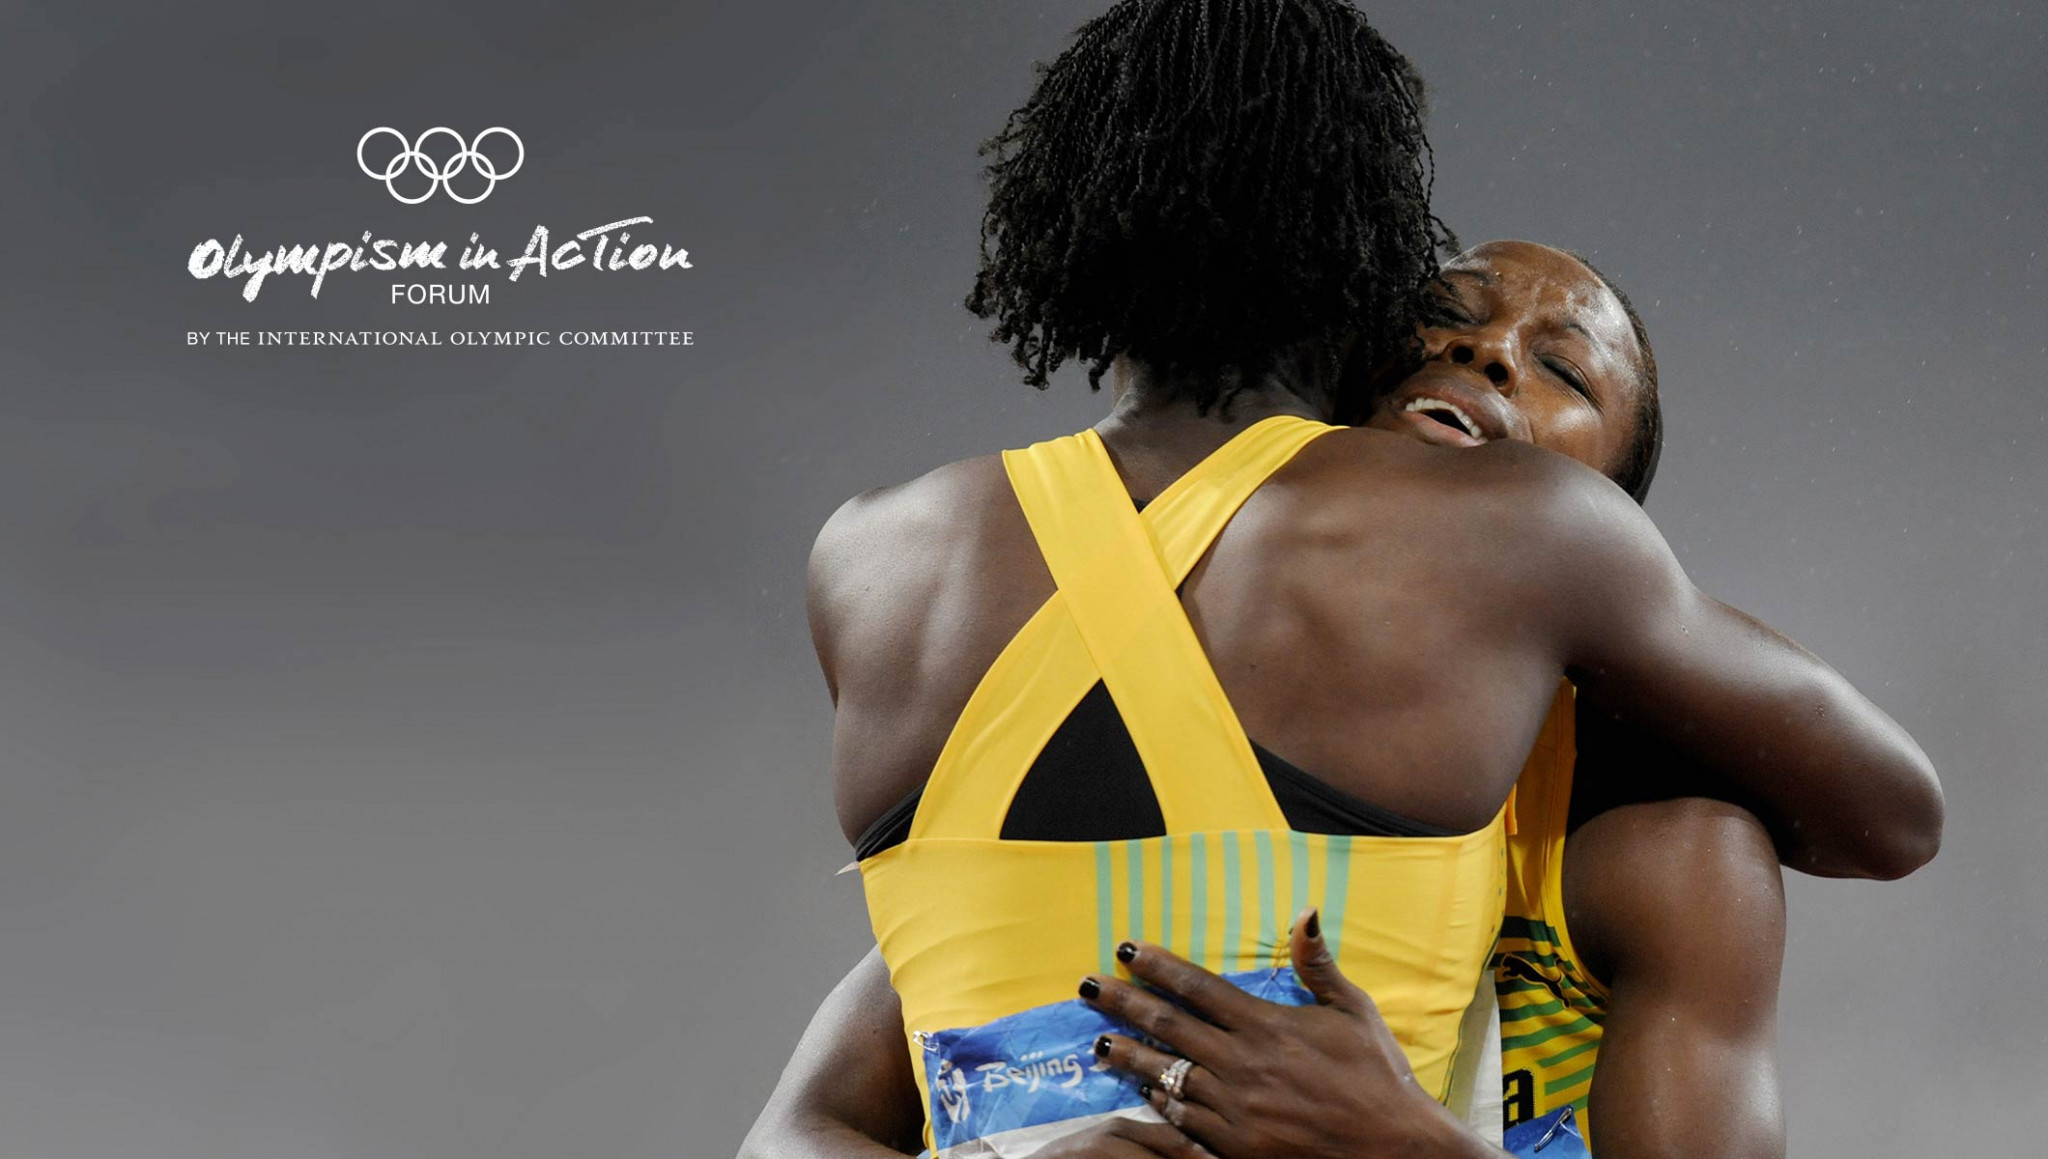 Women in sport, doping and perspectives on hosting Olympics to feature at Olympism in Action Forum